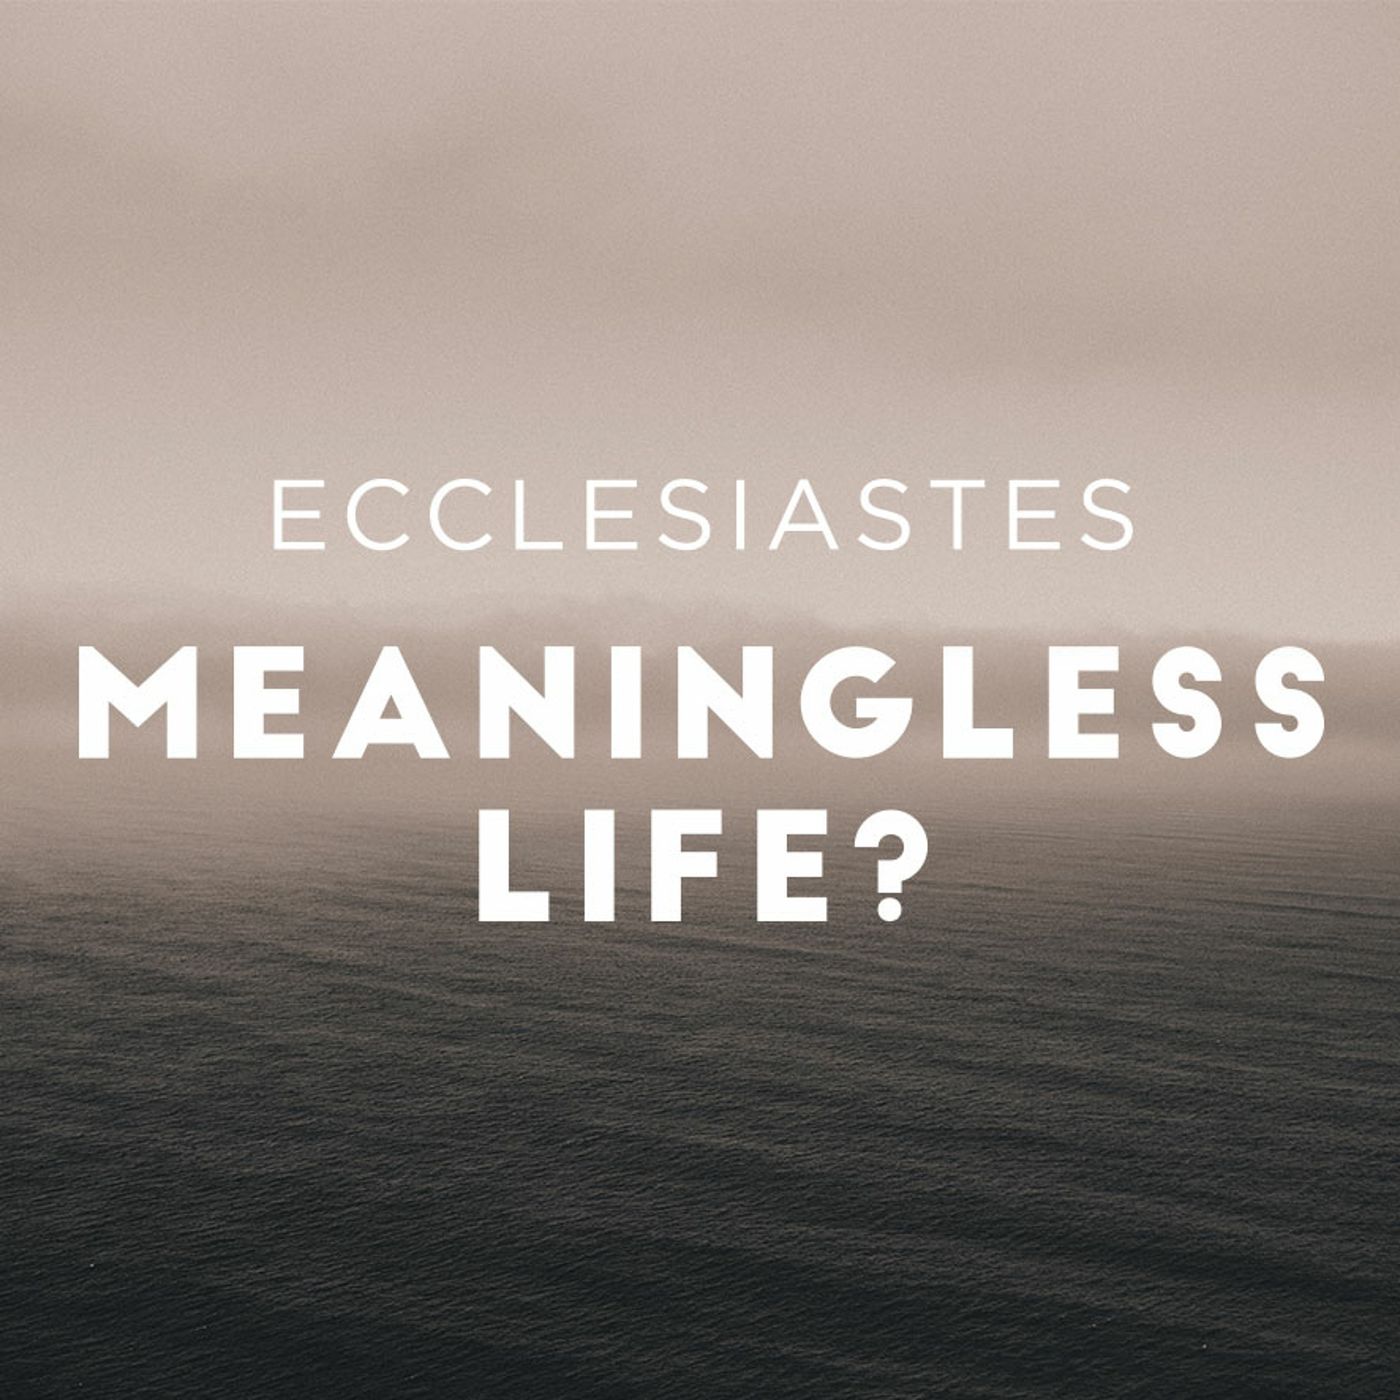 Drop Your Phone in the Lake: Ecclesiastes 3:16-4:3